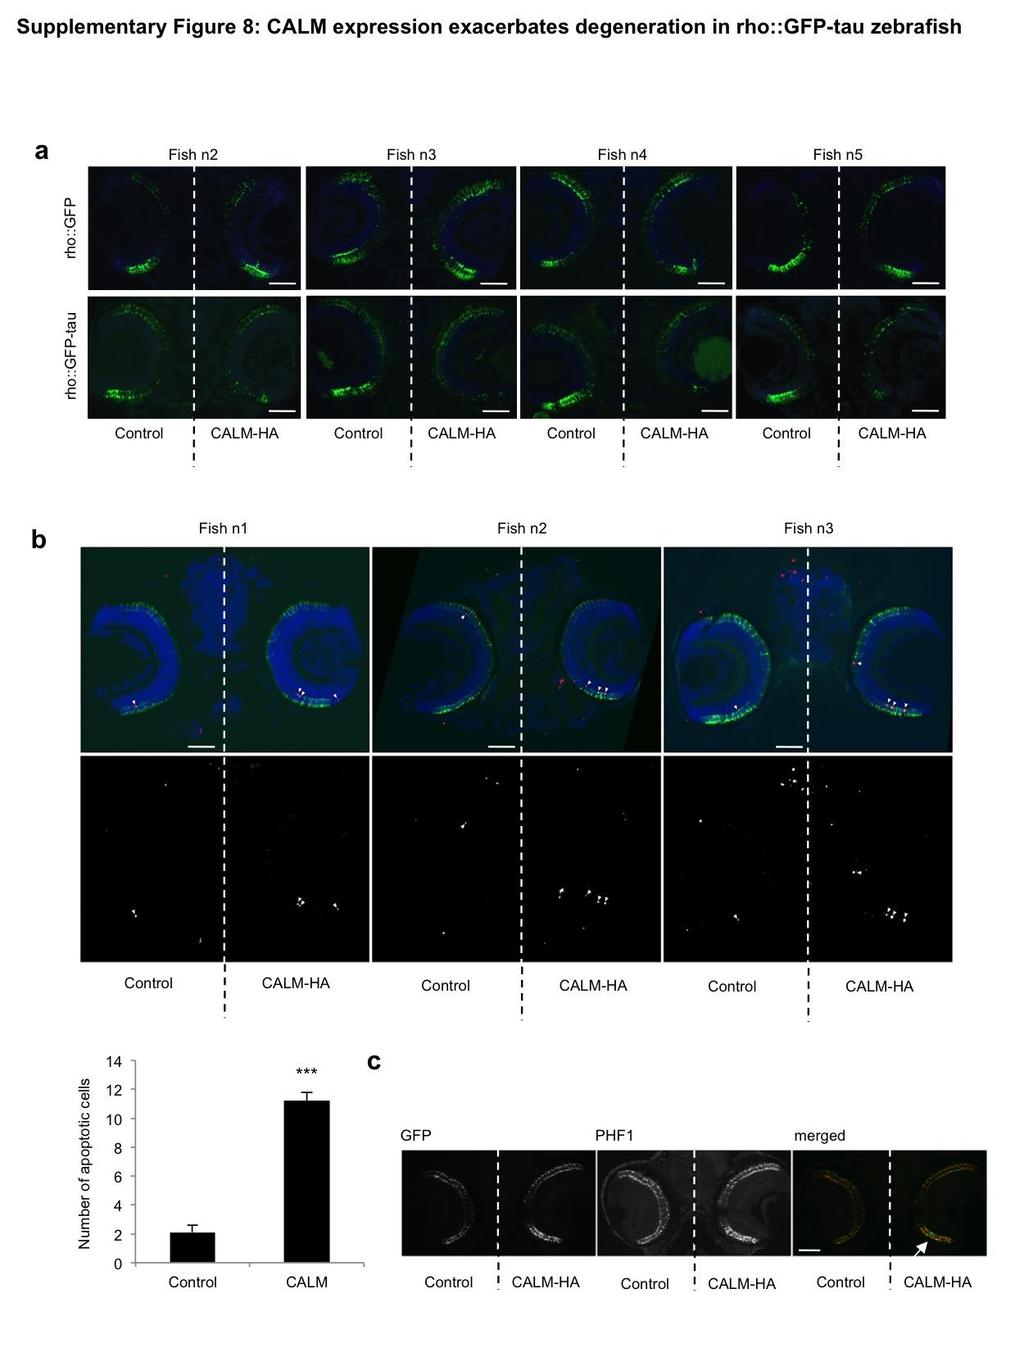 Supplementary Figure 8. CALM expression exacerbates degeneration in rho::gfp-tau zebrafish (a). Further examples of fish from the experiment described in Figure 9B are presented. Scale bar, 50 m. (b).